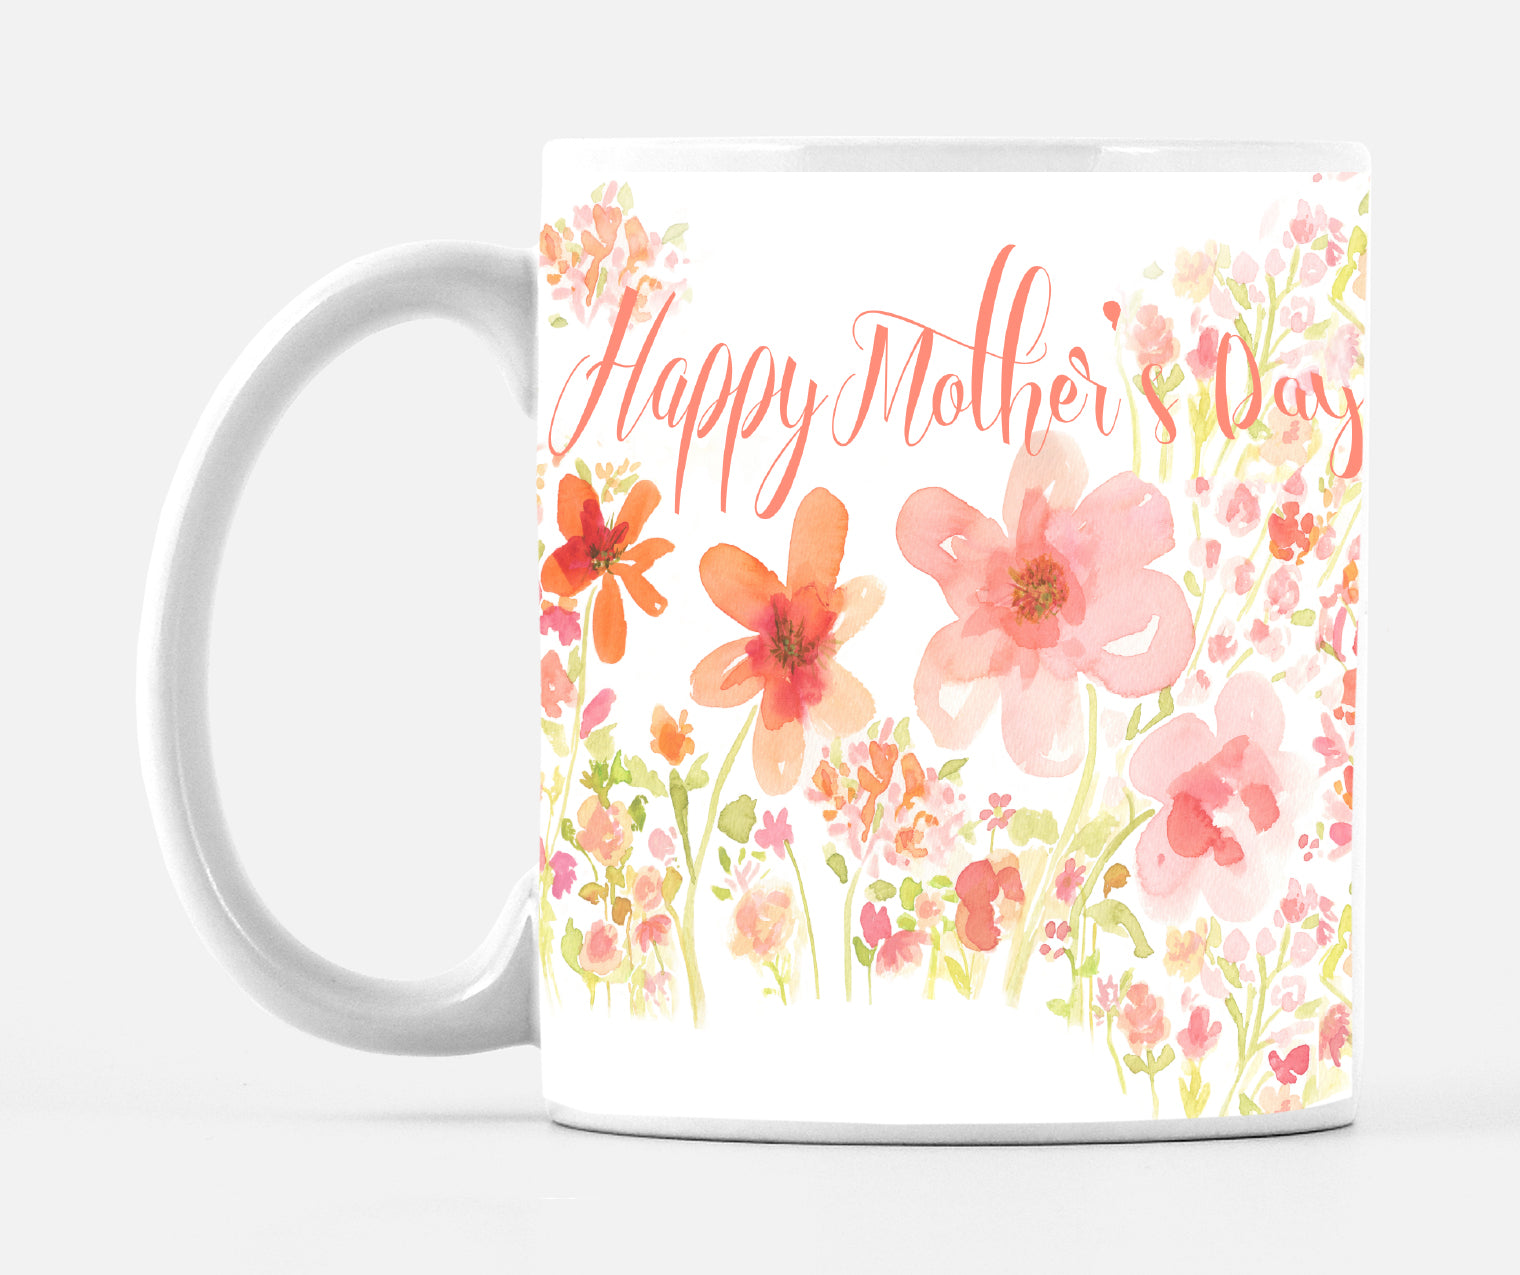 I Love You Mom Happy Mother's Day Mug - Dreams After All